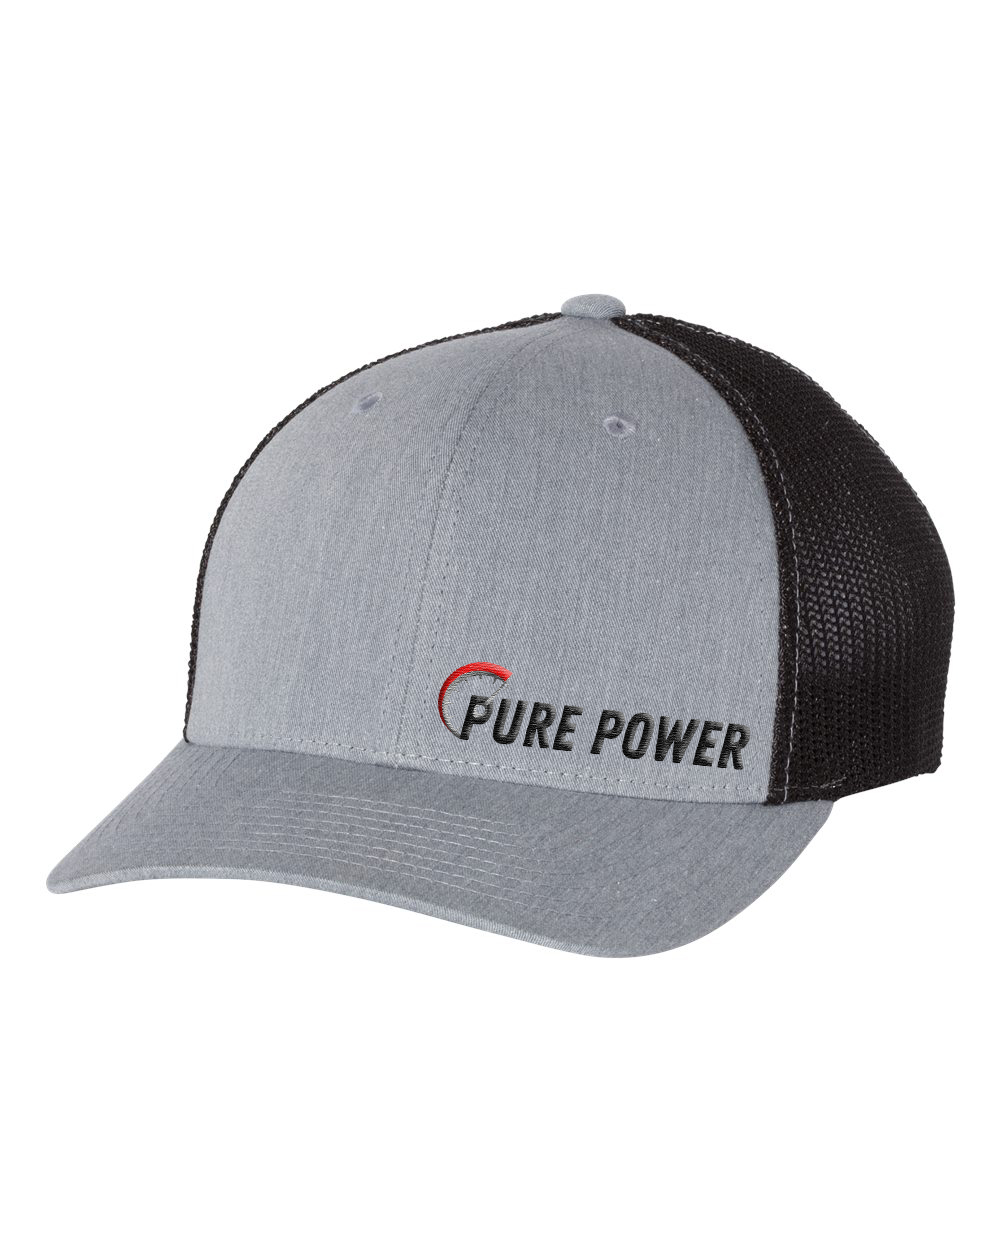 Ride Pure Power Logo Classic Pro Night Out Embroidered Snapback Trucker Hat Heather Gray/Black